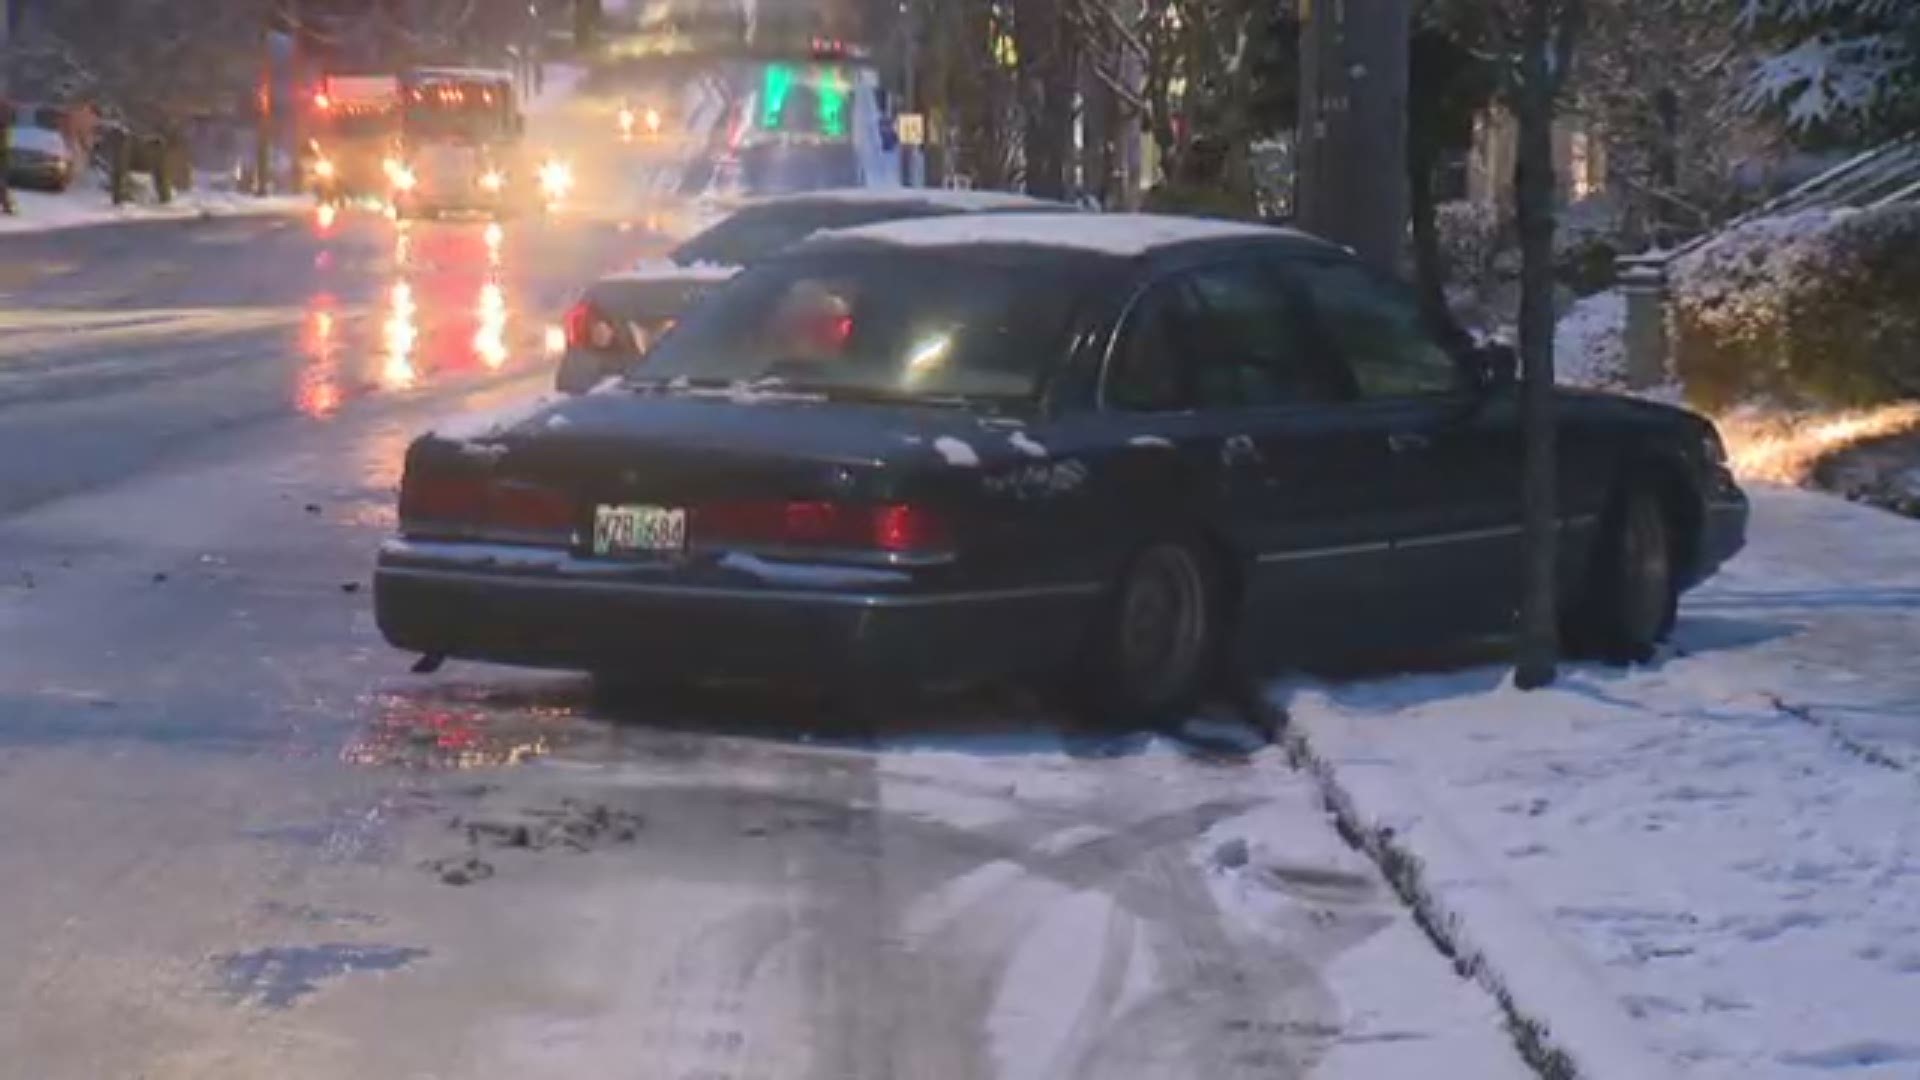 Nearly two dozen vehicles found themselves stuck Tuesday morning in a  trap of ice at Northeast 82nd Avenue and Killingsworth Street.